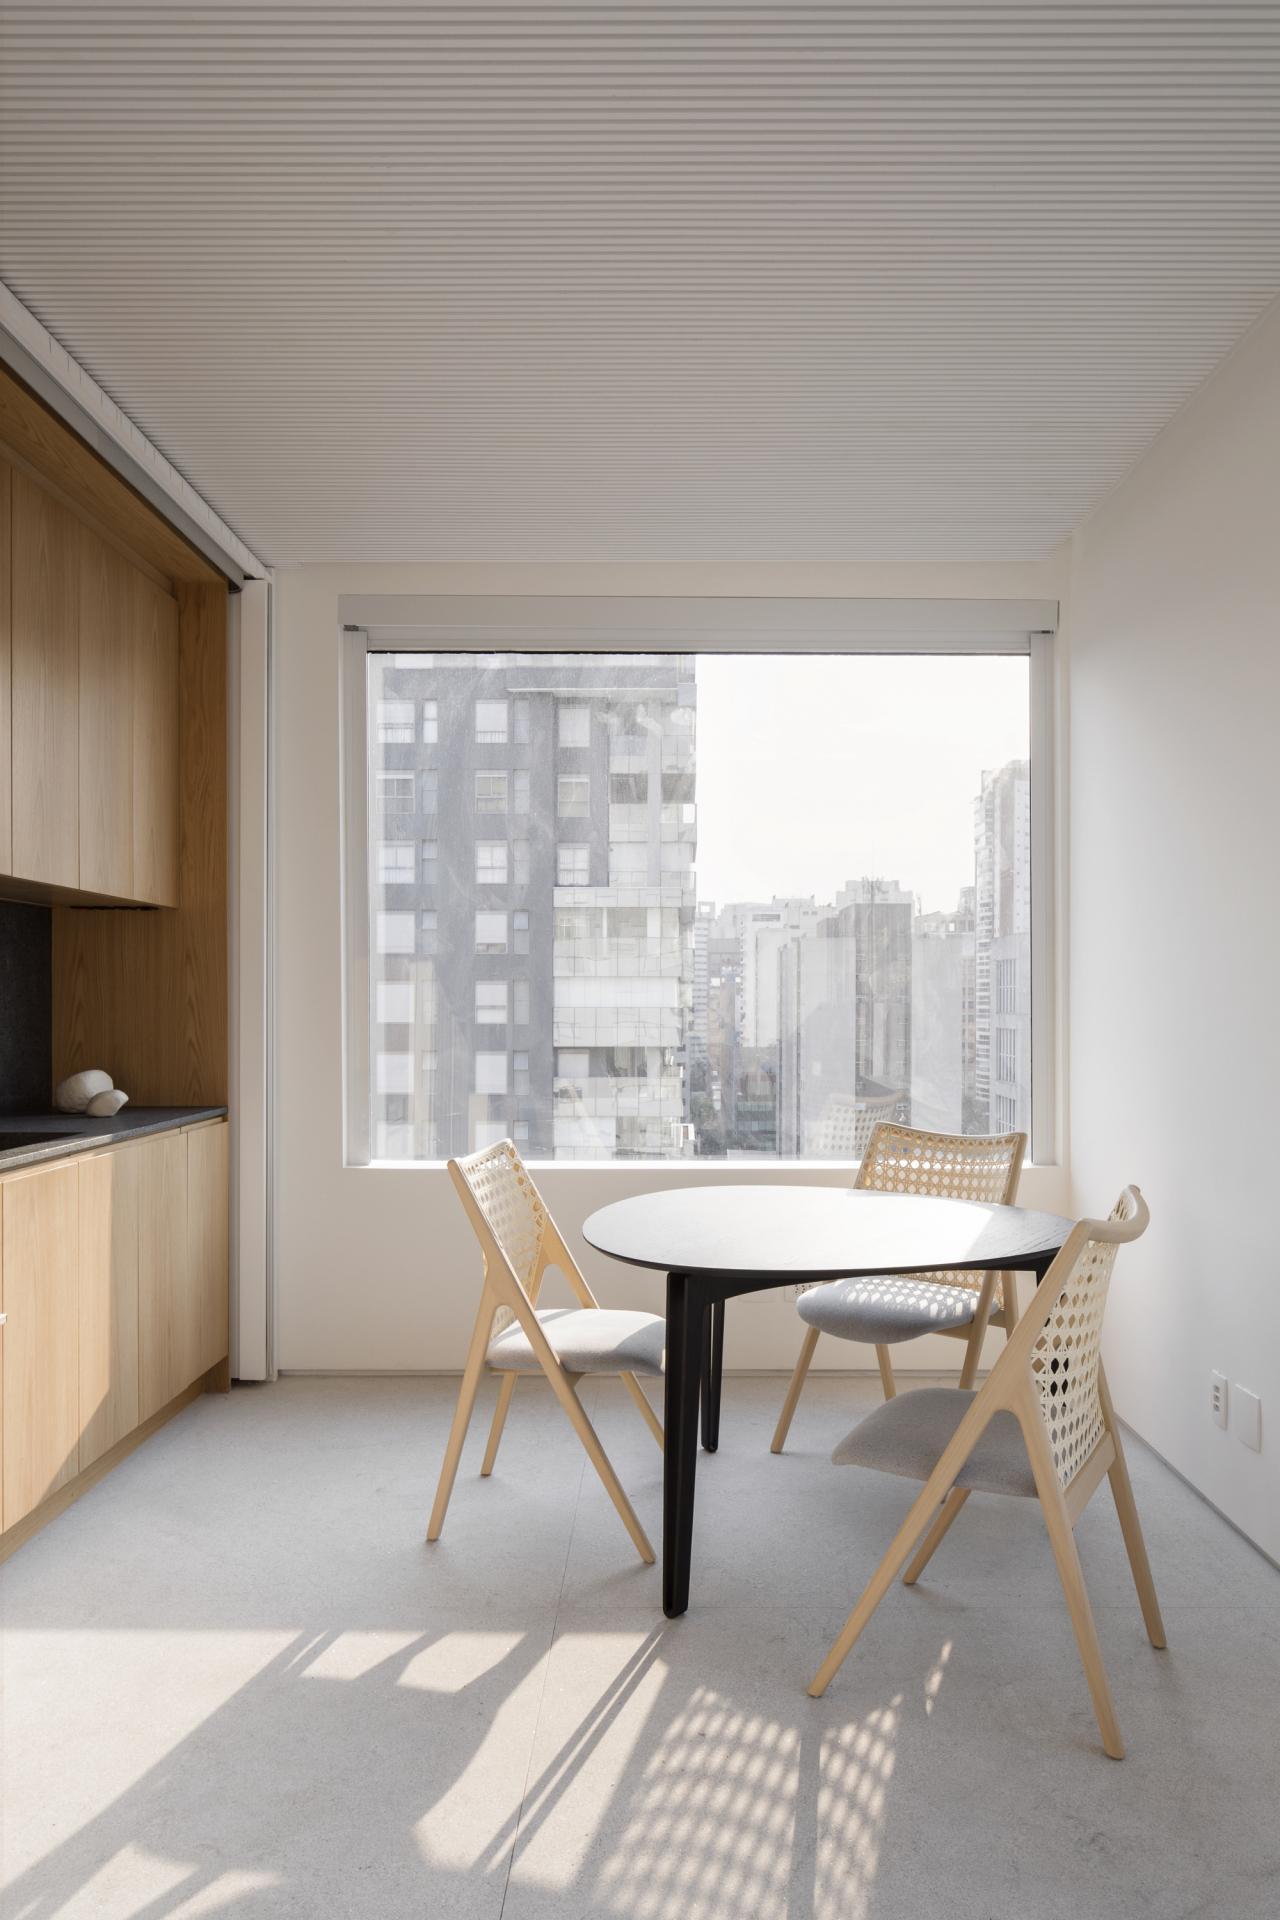  This 355-sq.ft. Minimalist Apartment is Small In Size But Big In Functionality